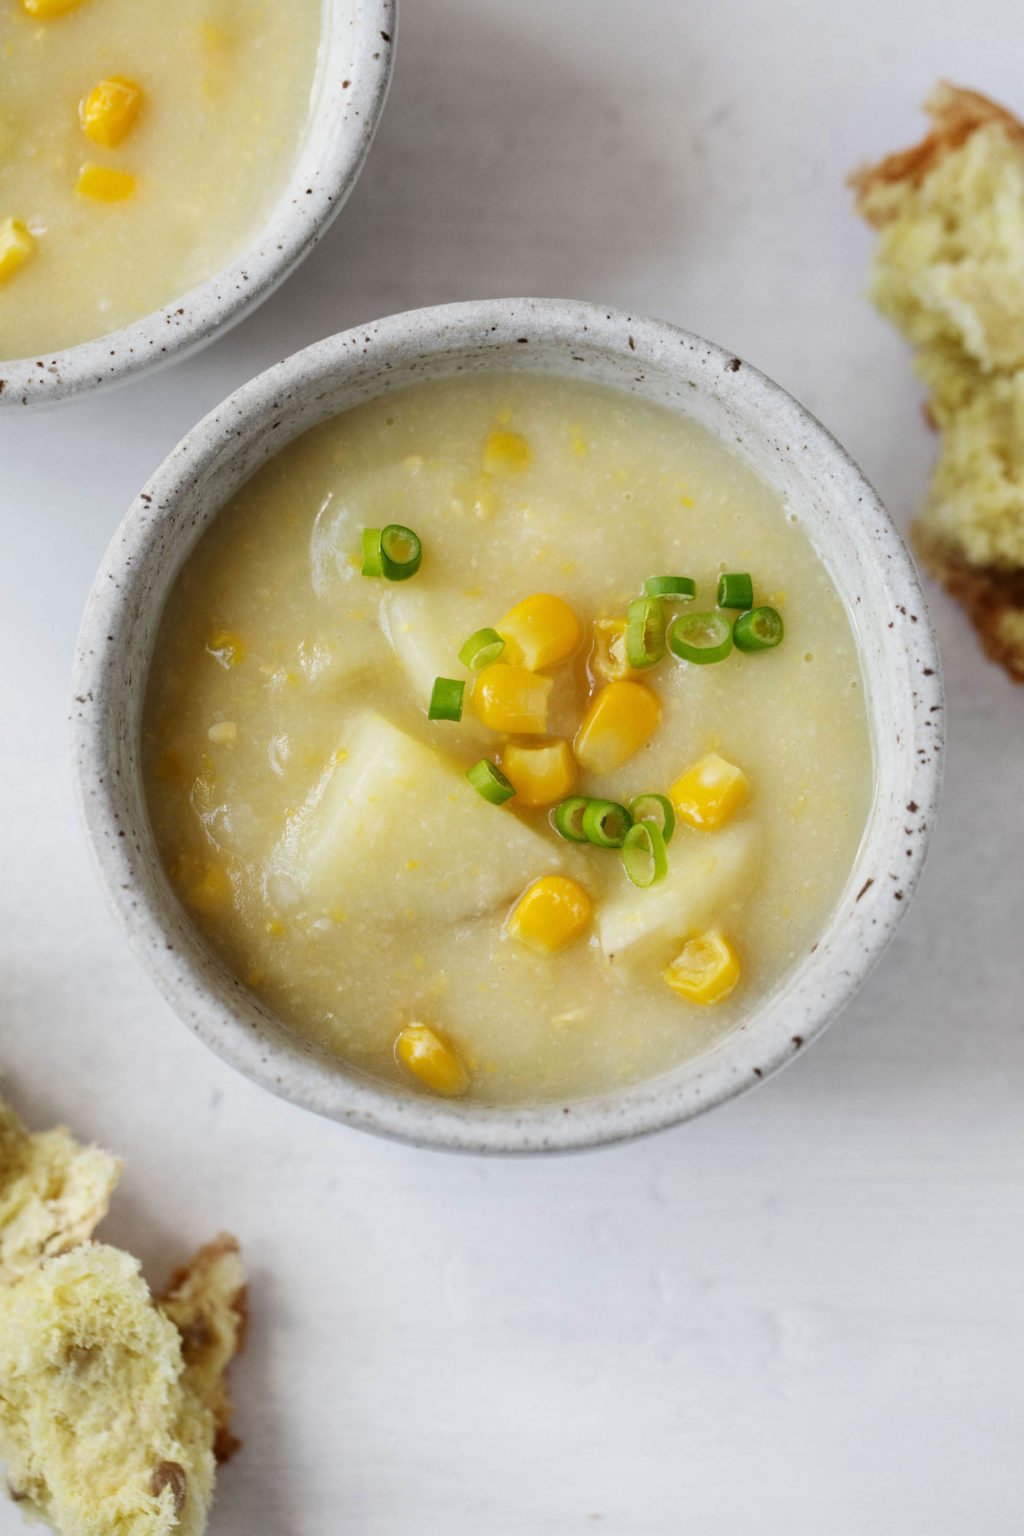 A creamy, inviting bowl of vegan chowder is topped with corn kernels and chives.